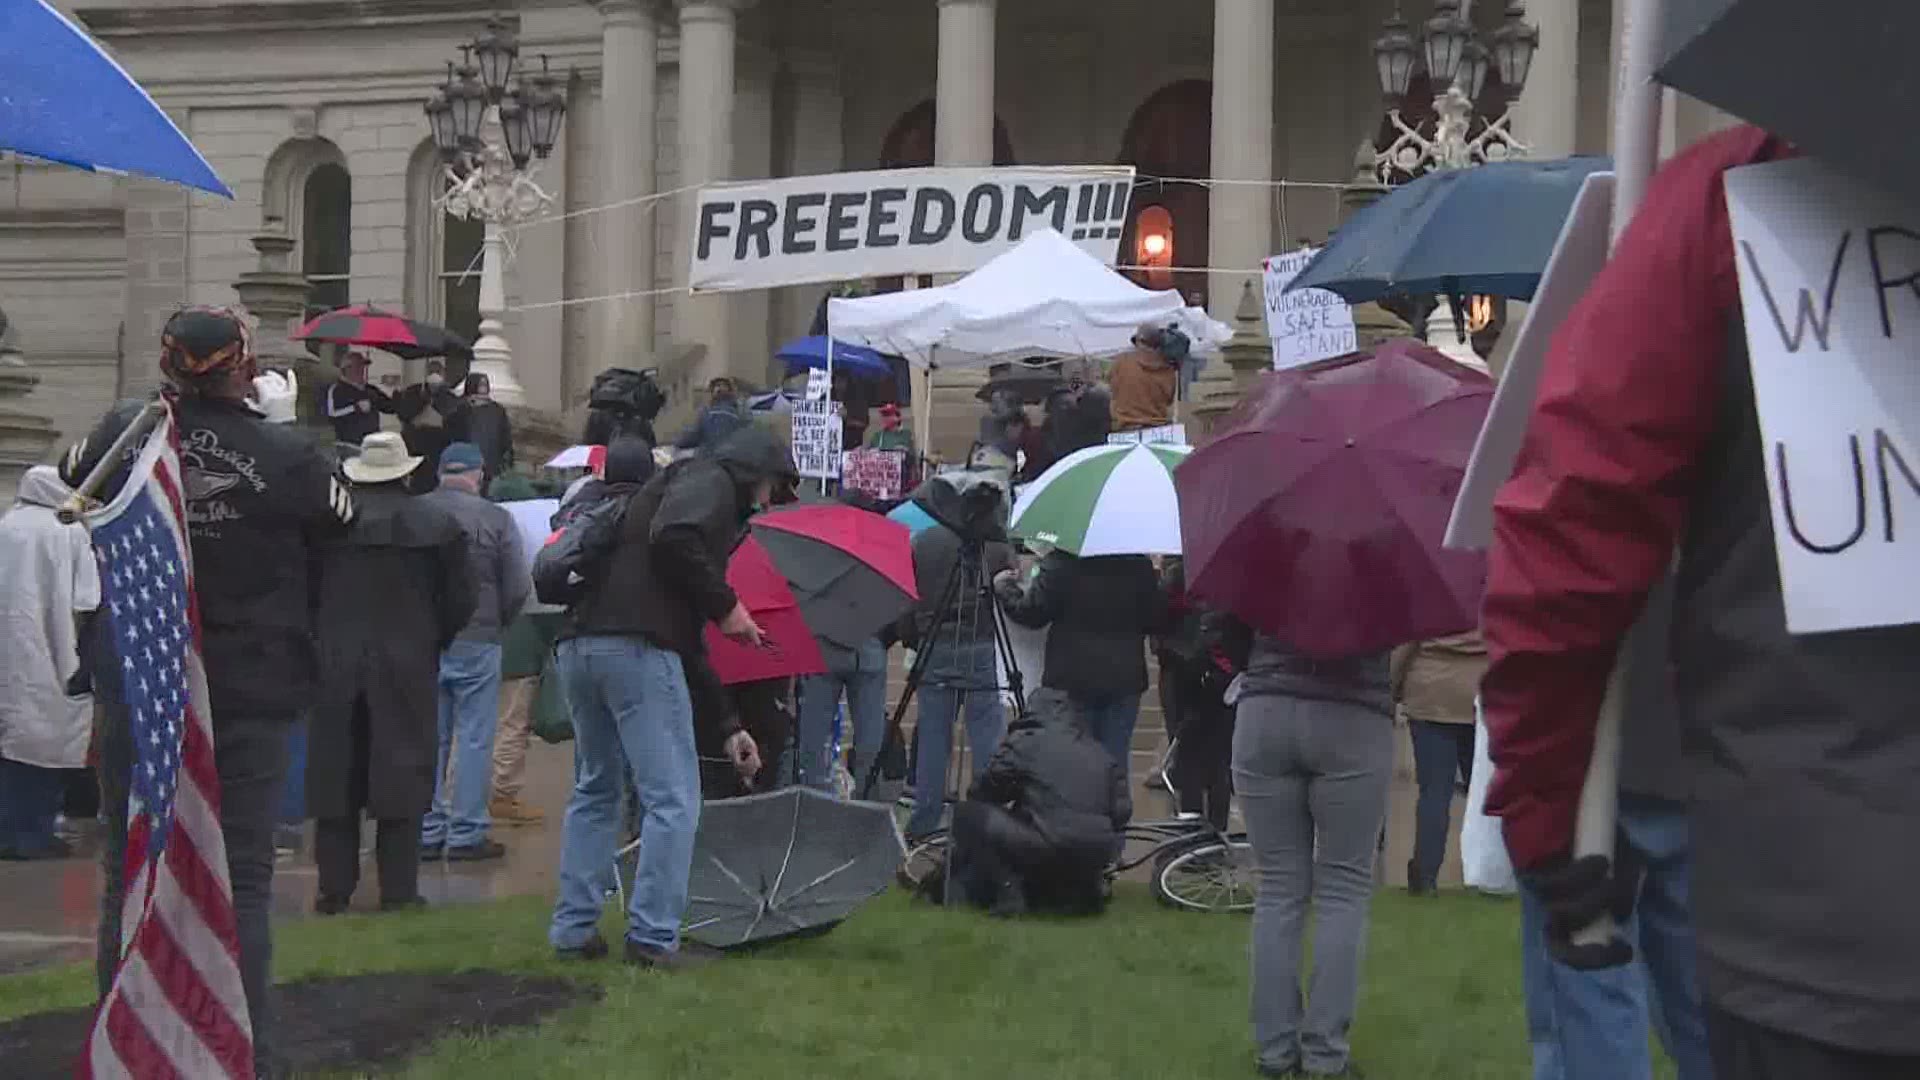 Protesters gathered in the rain at the Michigan State Capitol building Thursday, May 14 for a rally against Gov. Gretchen Whitmer's stay at home order.